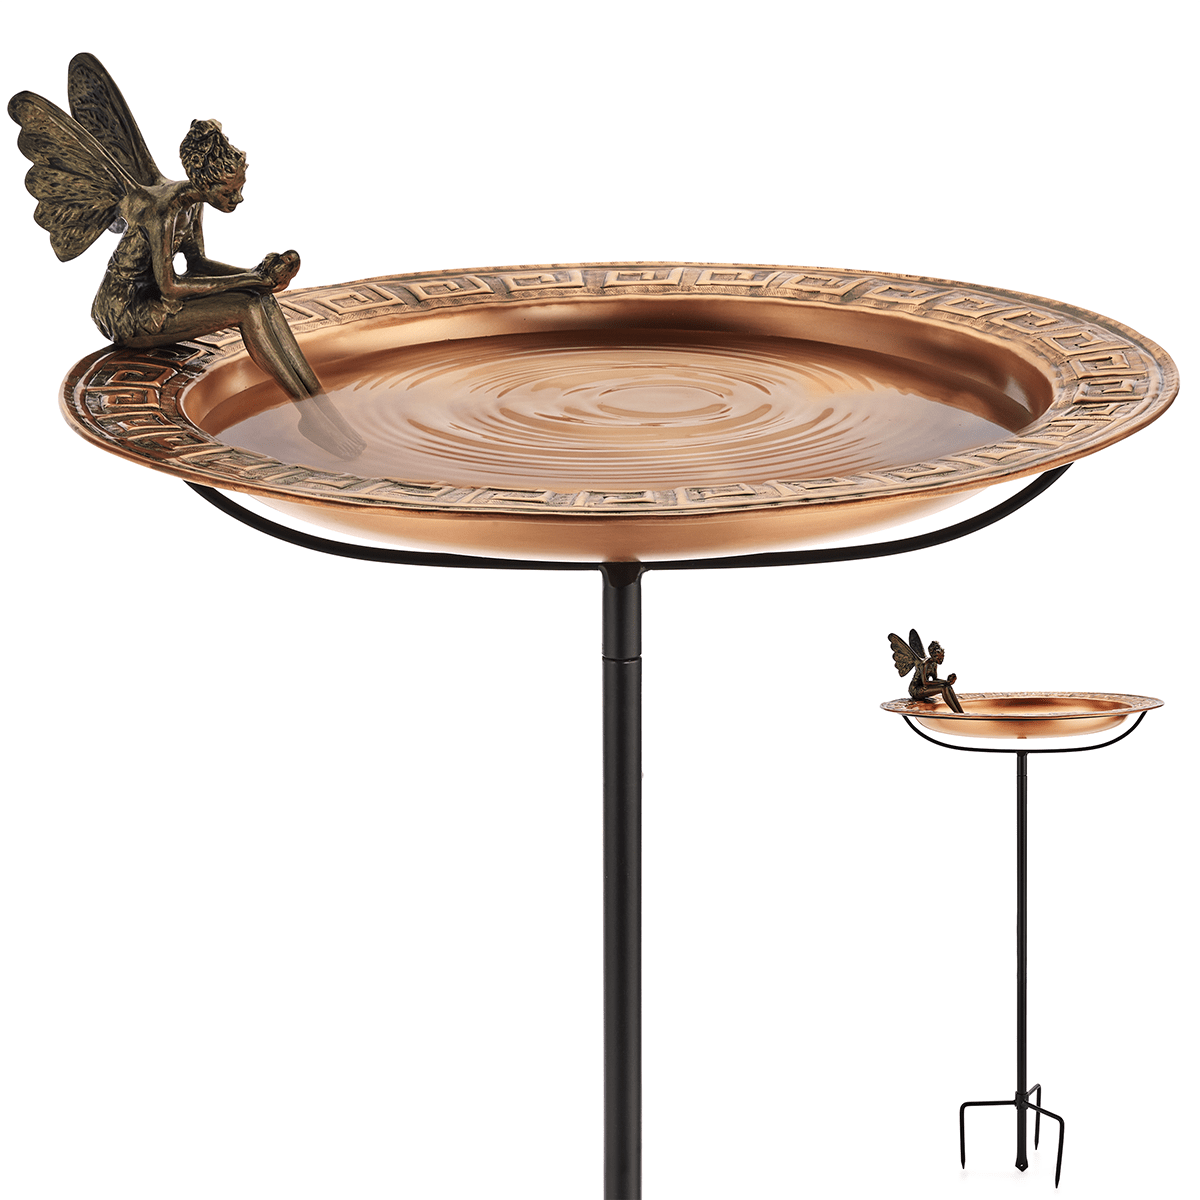 18" Greek Copper Bird Bath with Fairy and Garden Pole - Good Directions